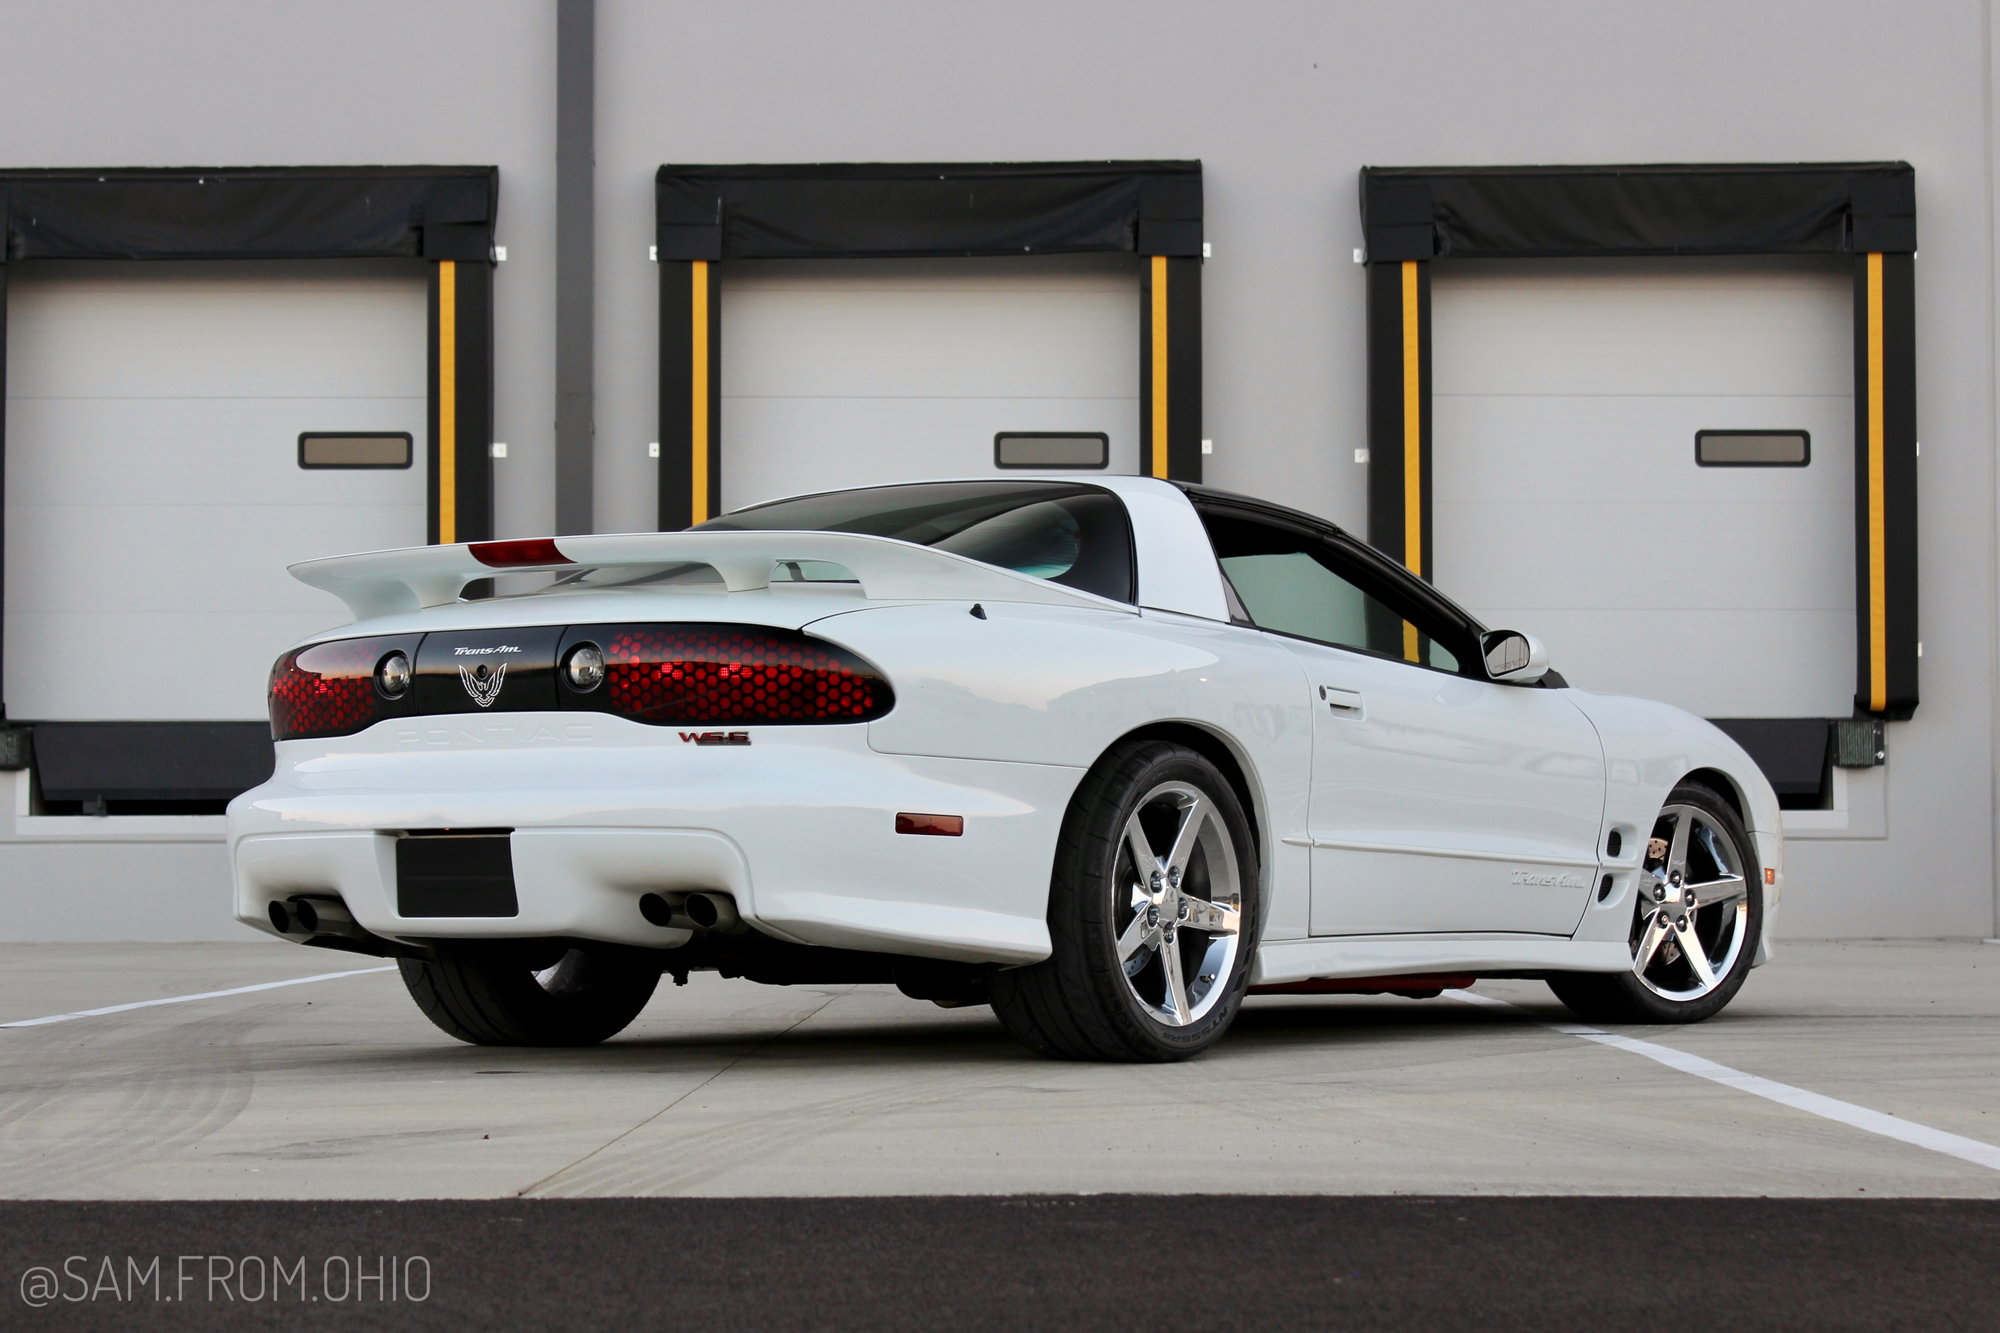 2000 Pontiac Firebird - procharged t56 ws6 white - Used - VIN 2g2fv22gxy2175567 - 86,000 Miles - 8 cyl - 2WD - Manual - Coupe - White - Dayton, OH 45424, United States